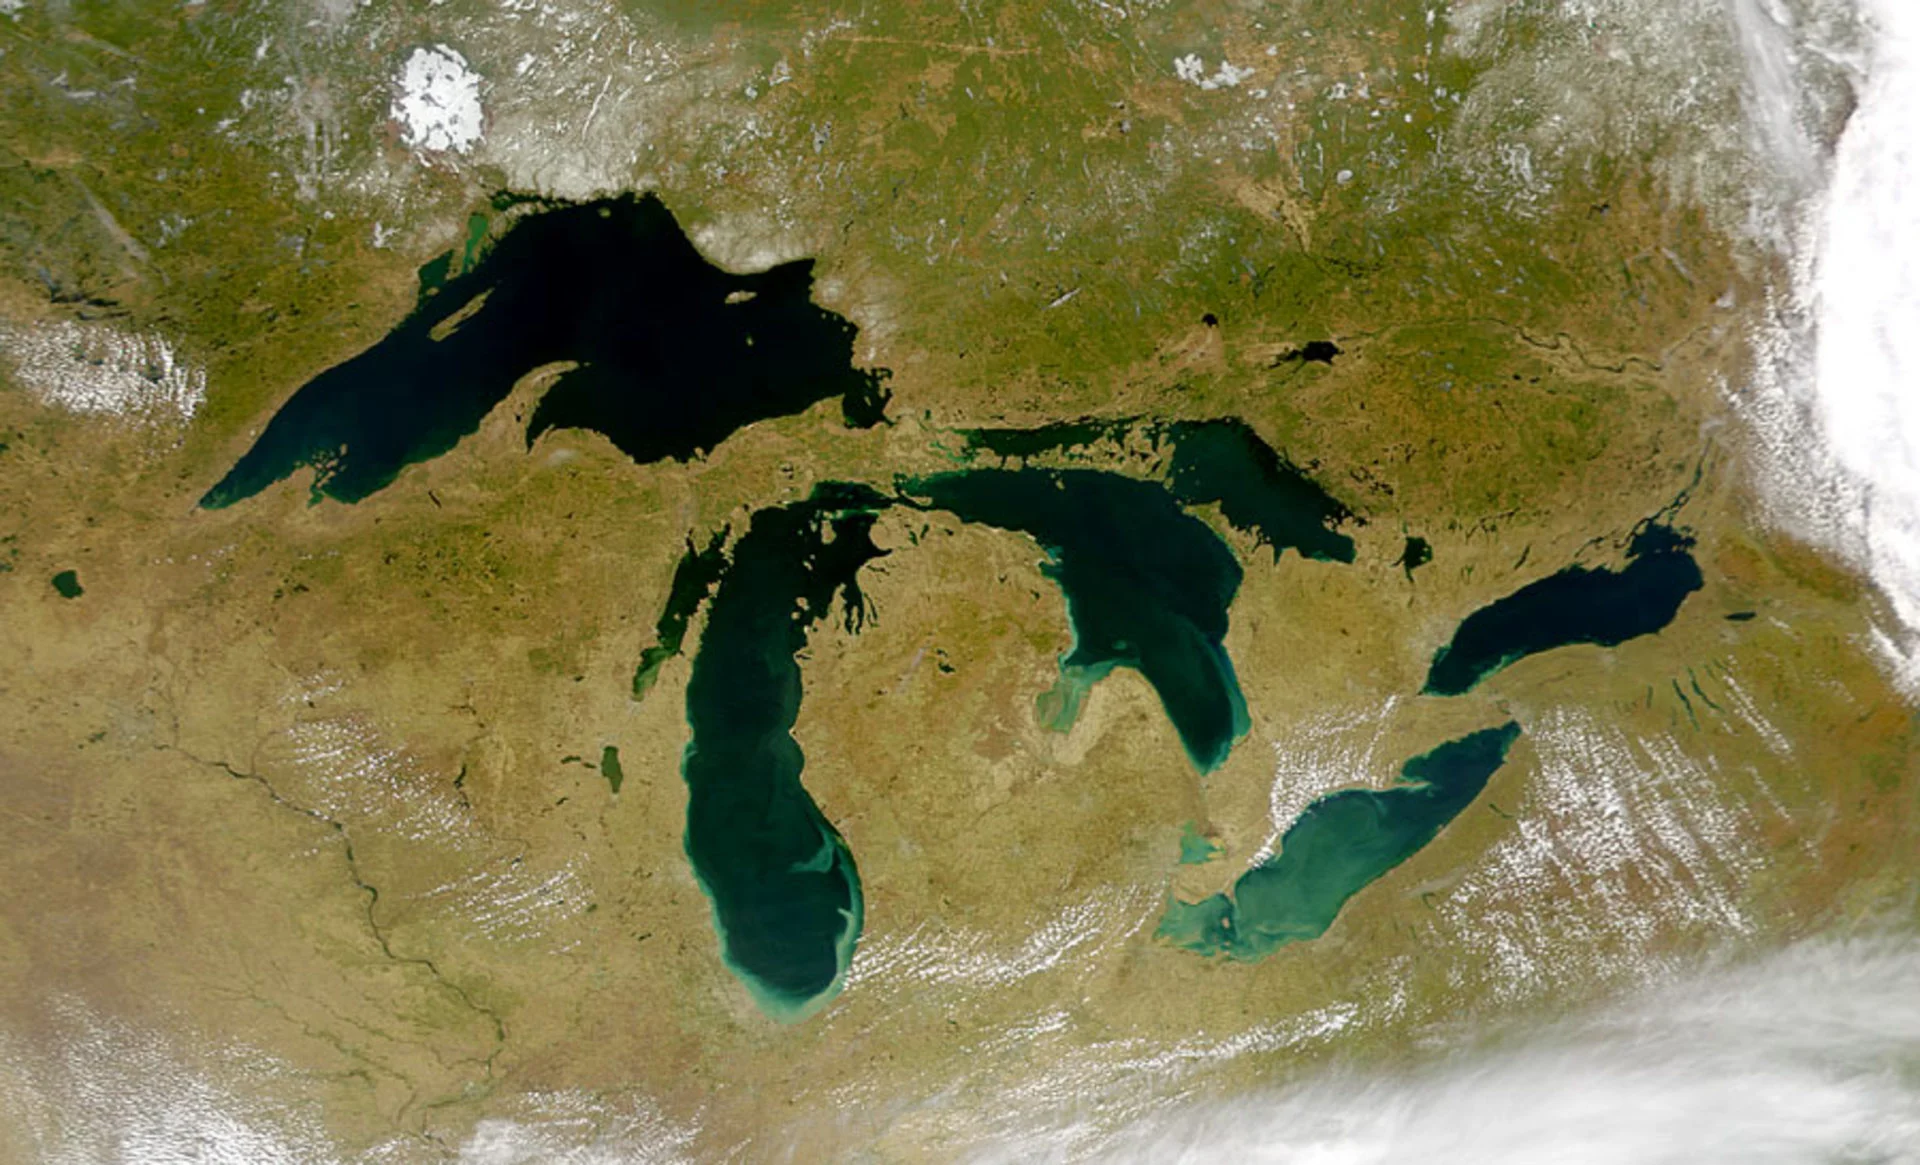 Great Lakes warming will trigger more extreme weather, study